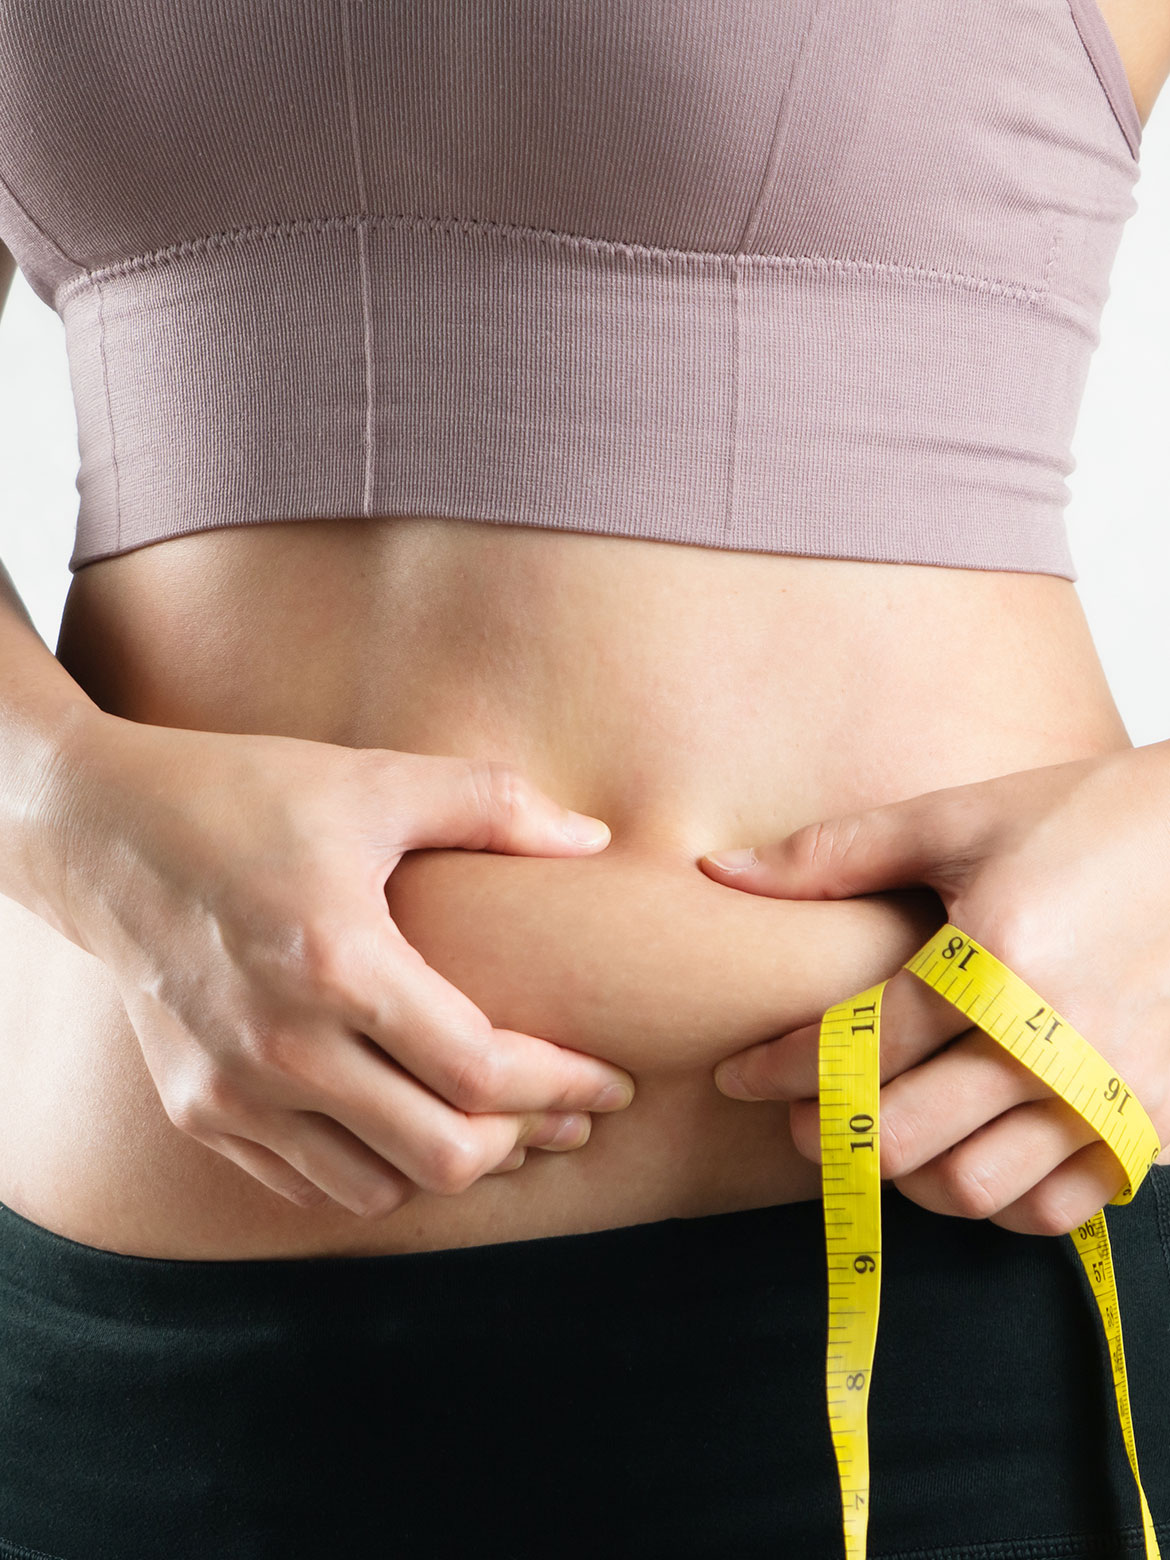 Trimming the Waistline: Effective Strategies to Reduce Belly Fat